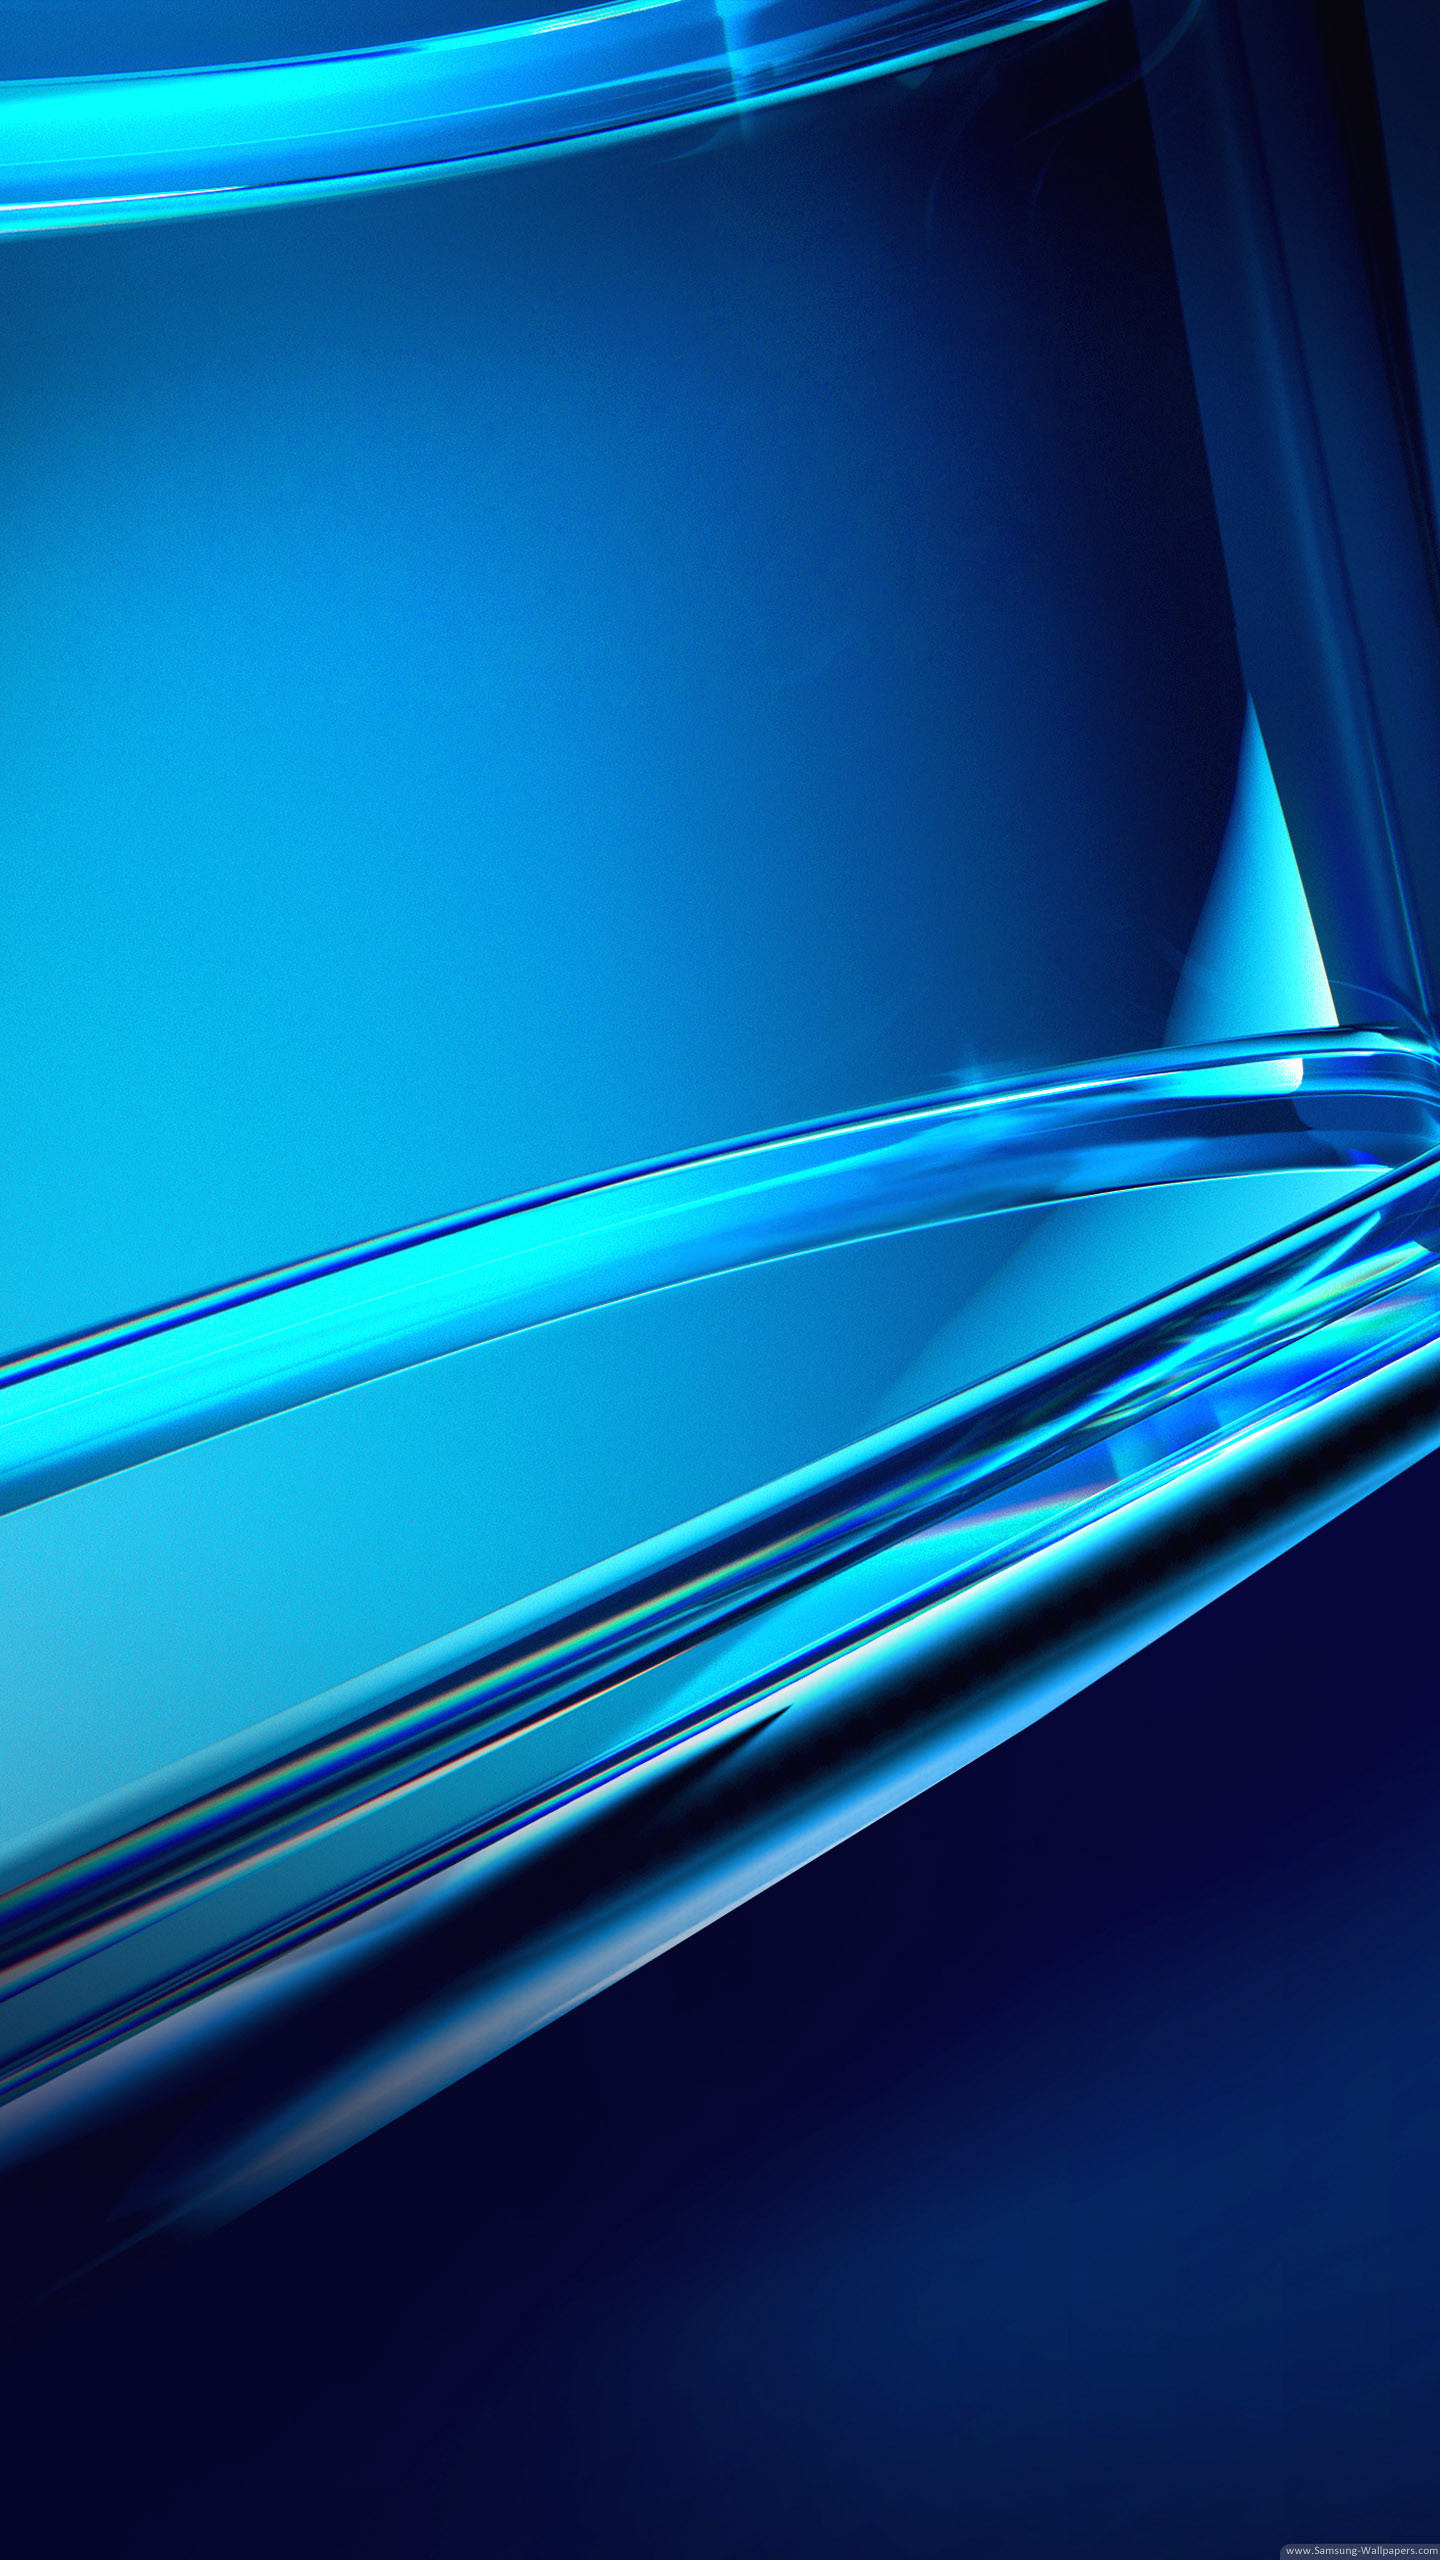 Droid Turbo 2 Official Stock Samsung Galaxy S6 Wallpaper - Droid Turbo 2 -  1440x2560 Wallpaper 